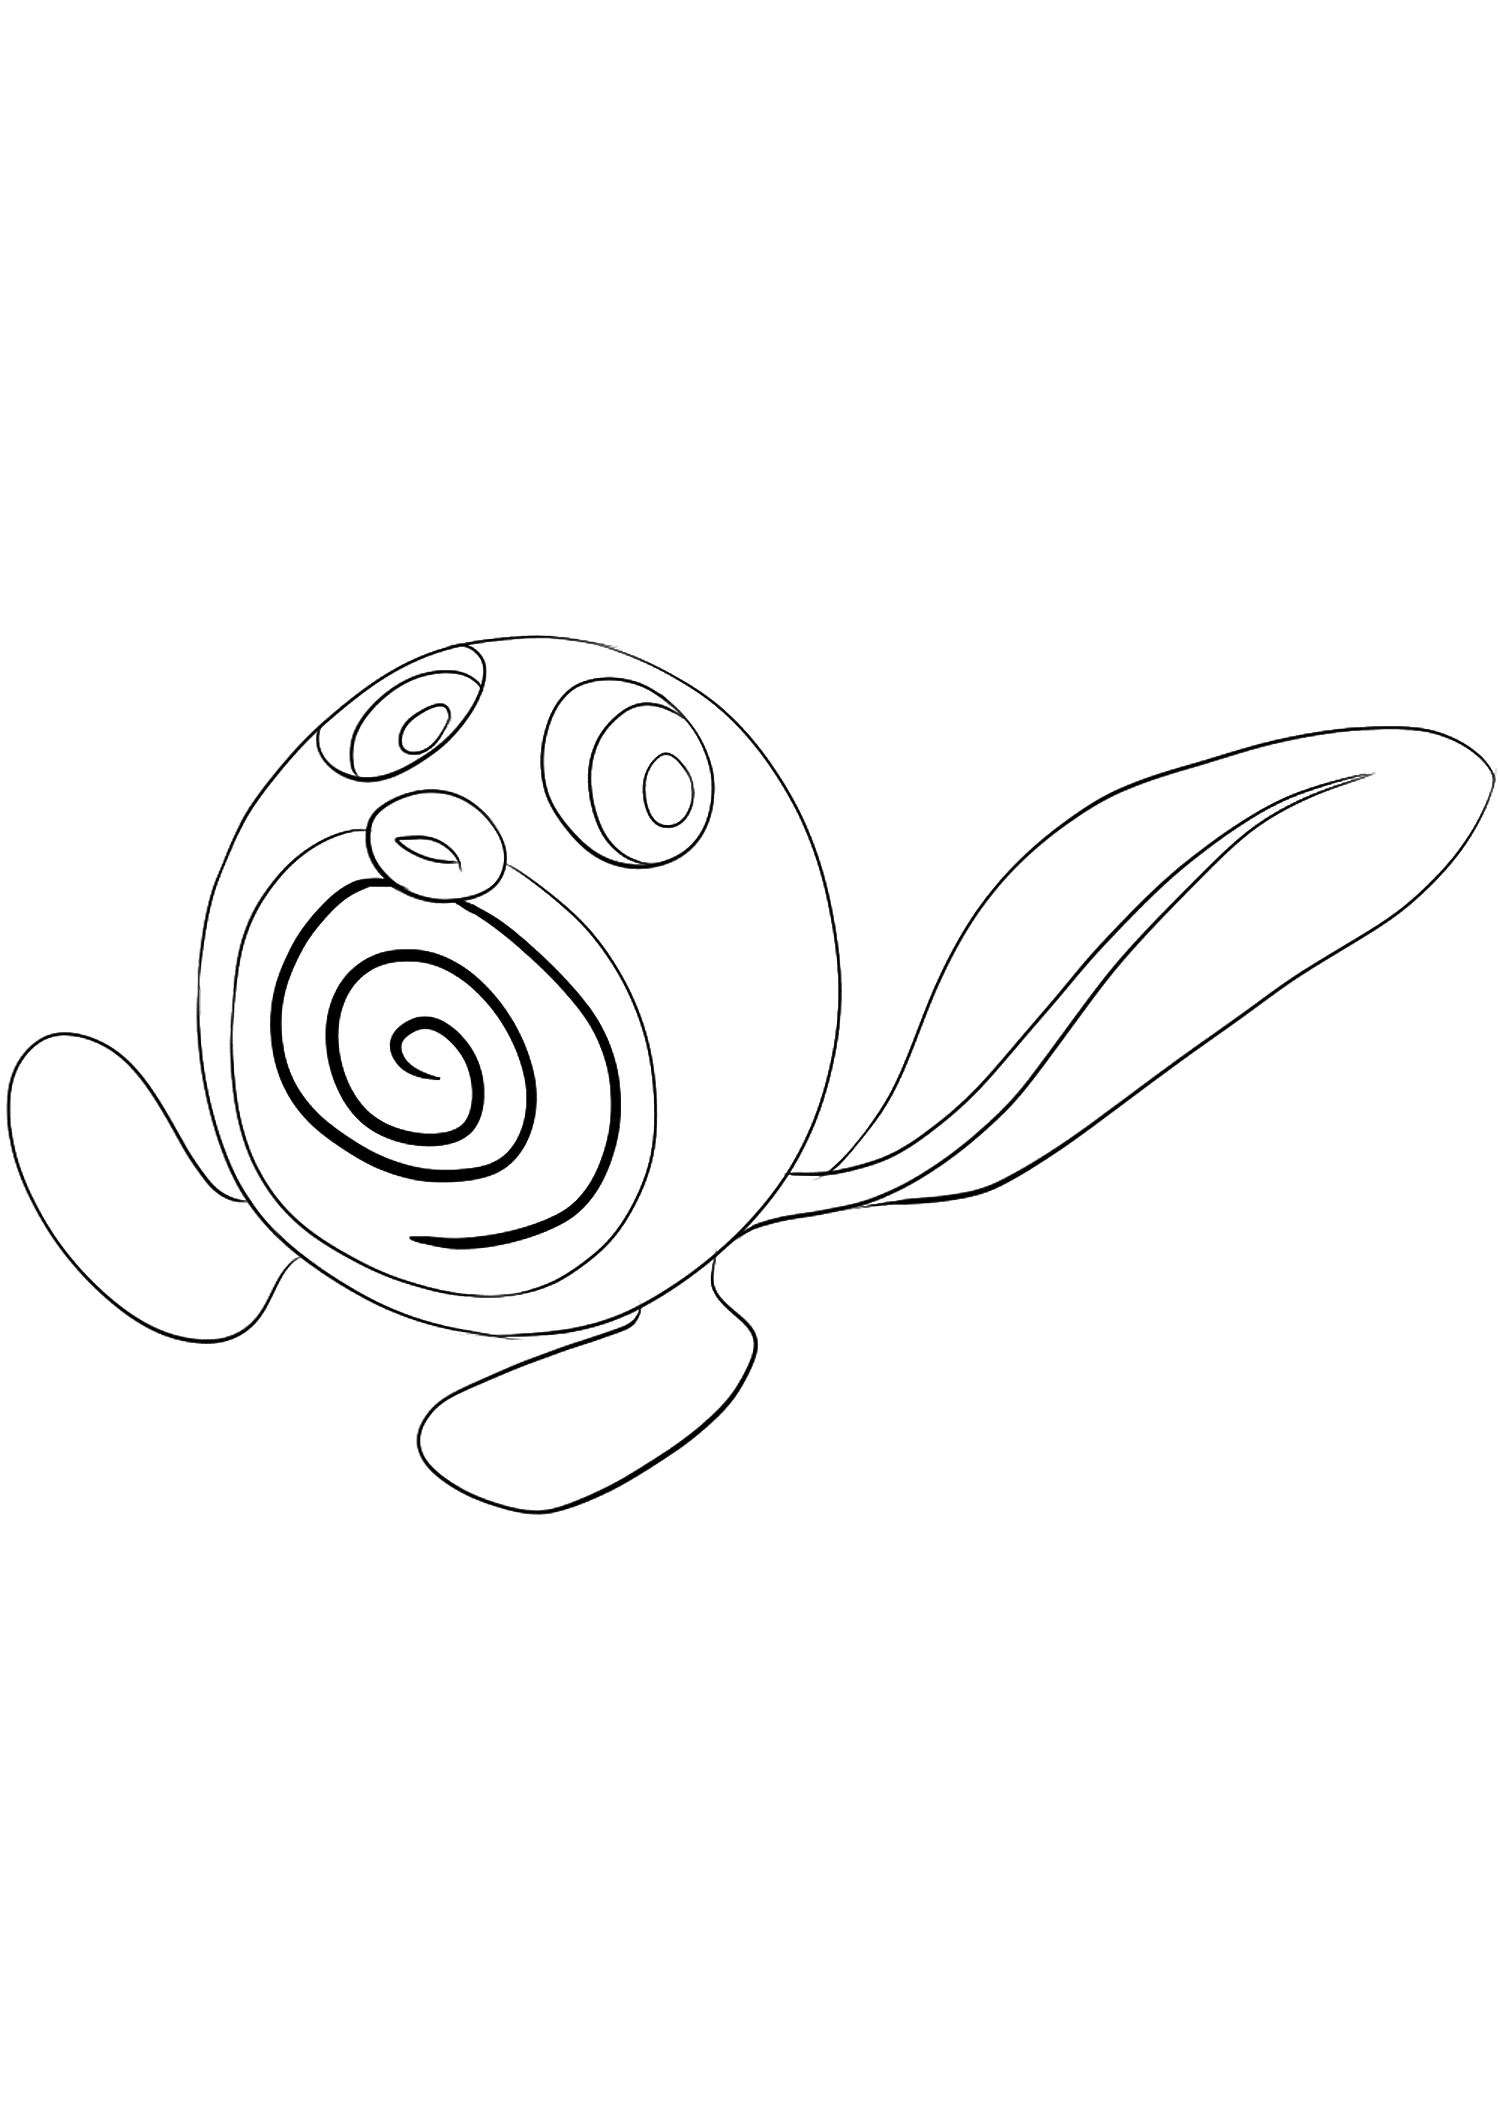 Poliwag No.60 : Pokemon Generation I - All Pokemon coloring pages Kids